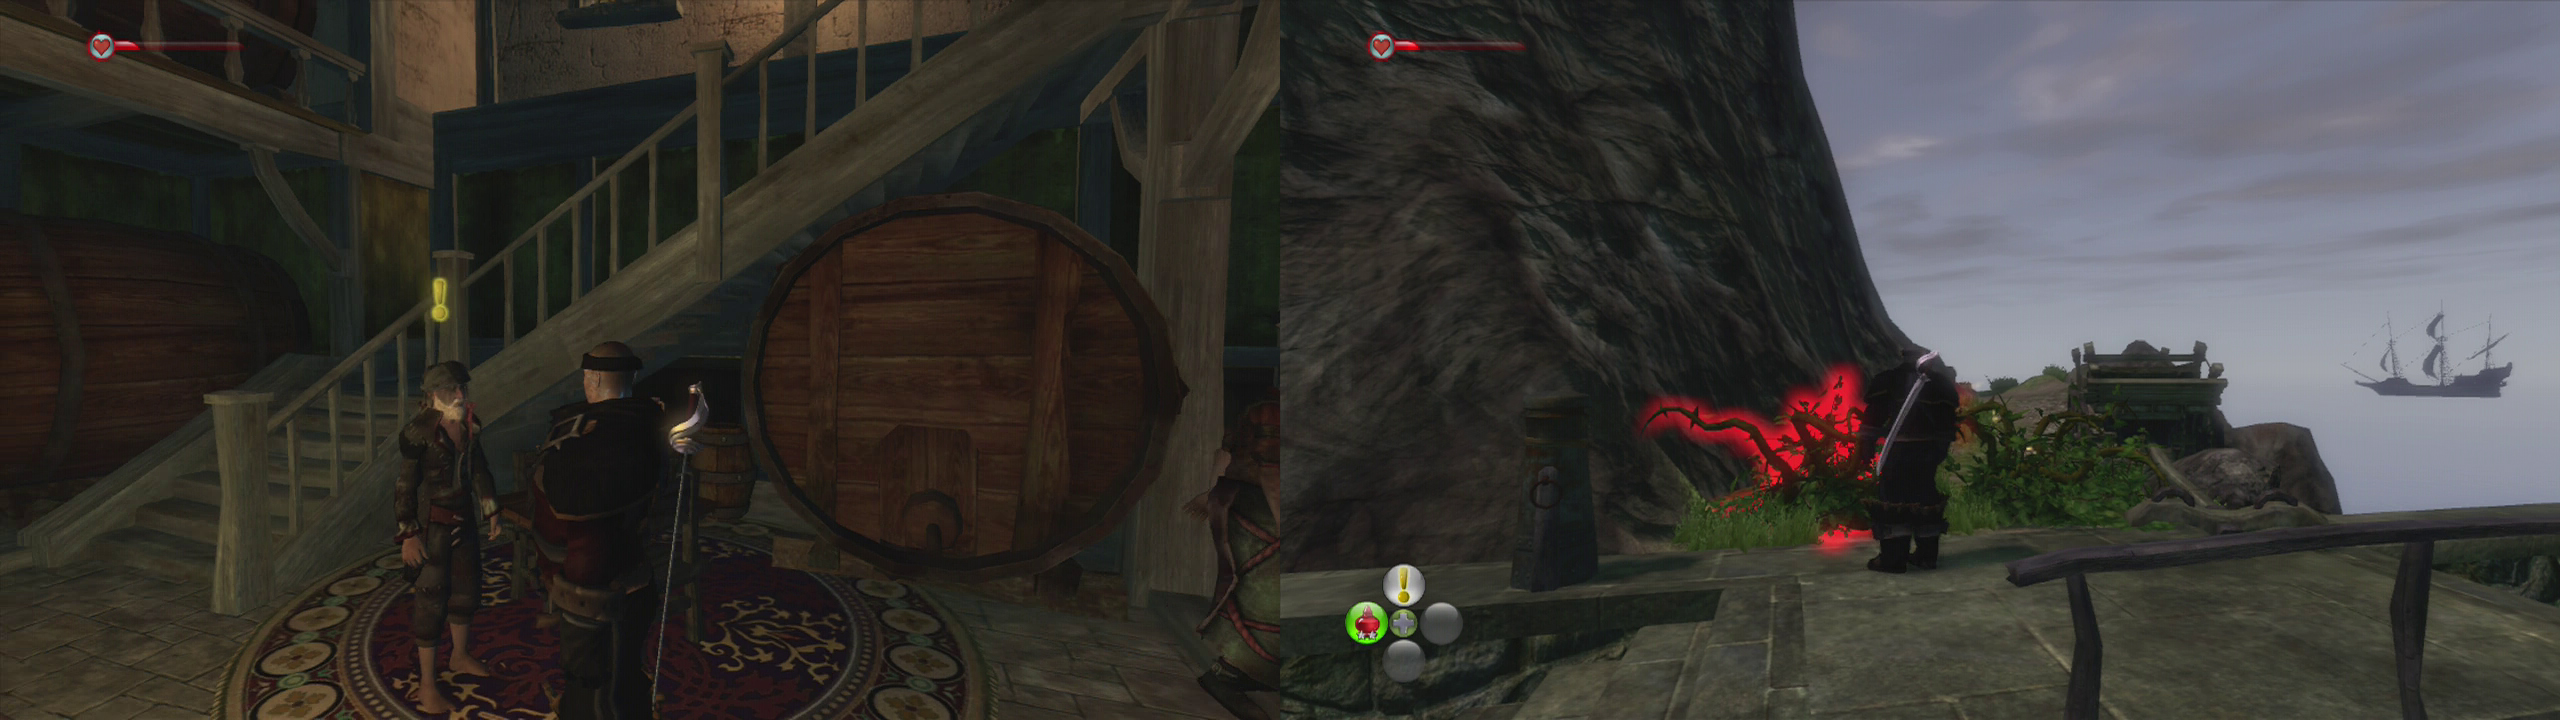 Pick up the quest in the inn (left) then find the shrubs along the waterfront leading to the cave (right).